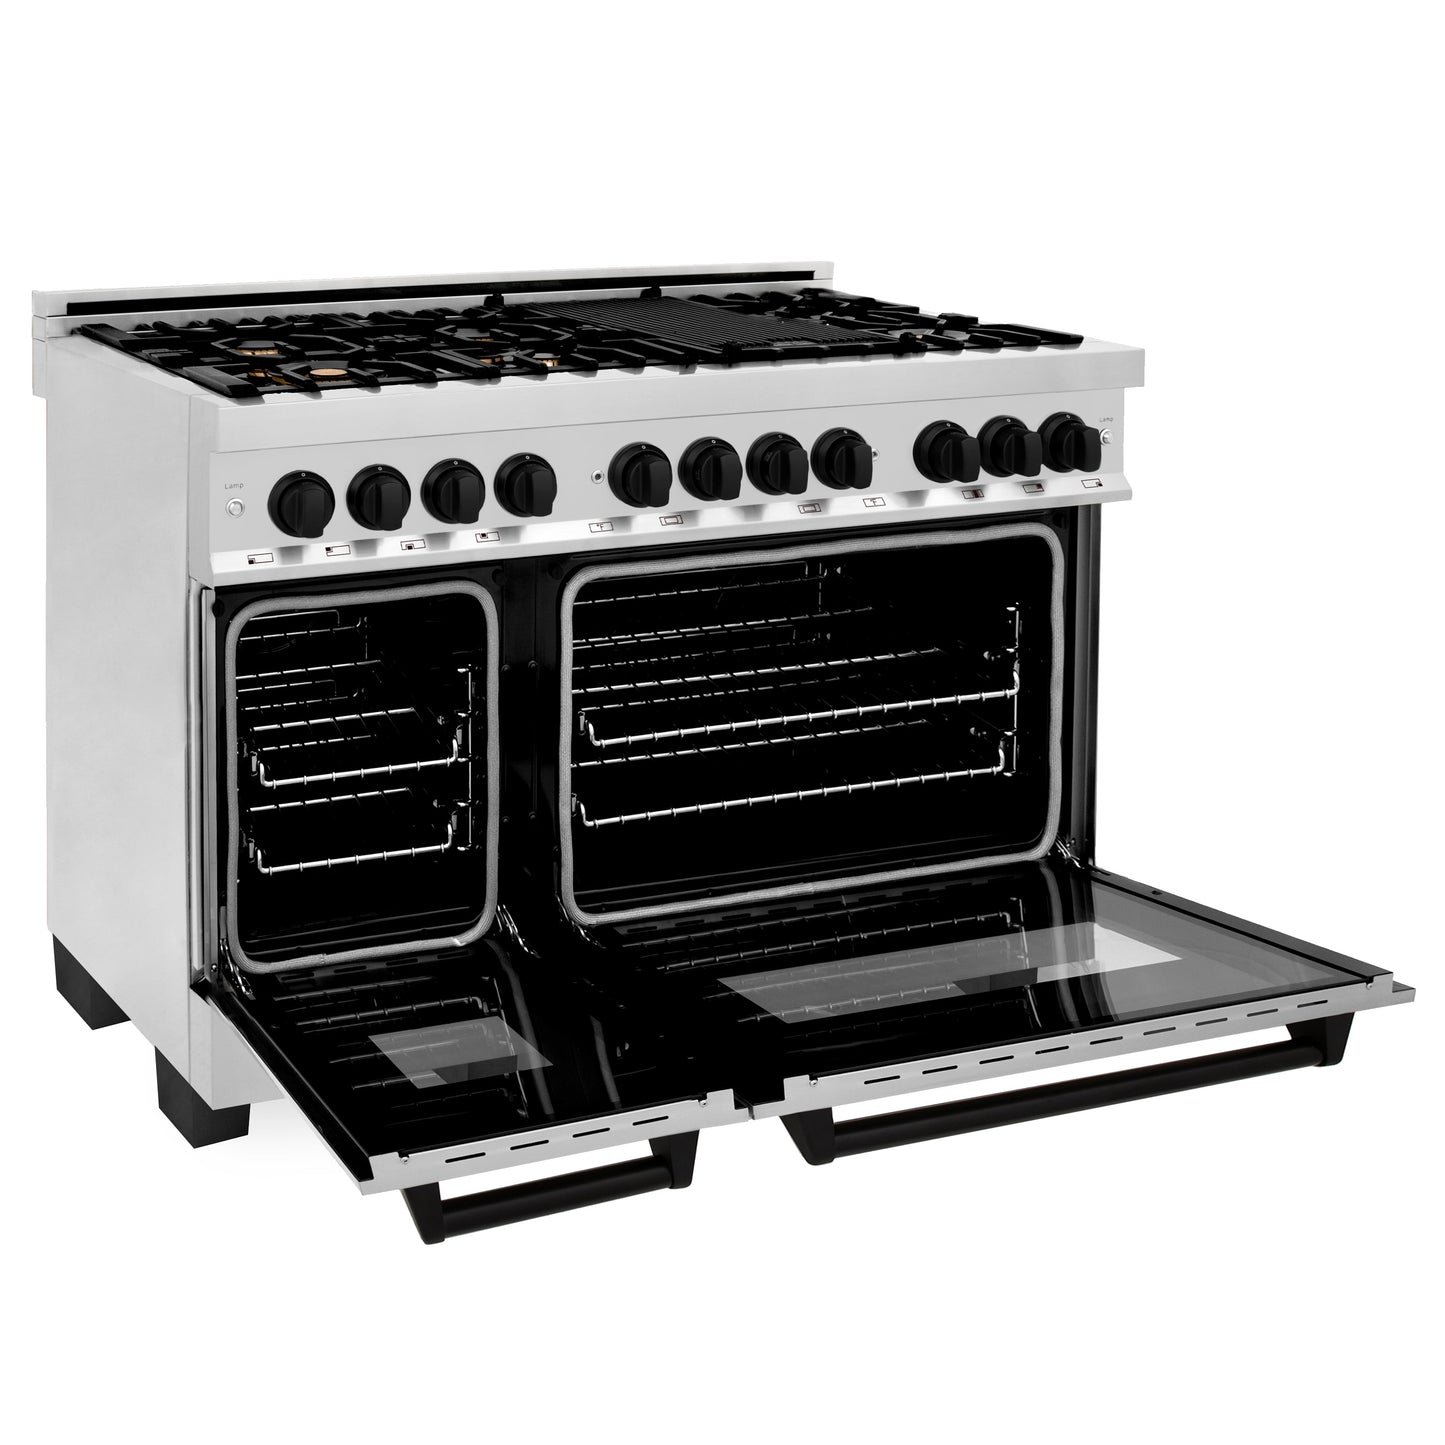 ZLINE Autograph Edition 48" Dual Fuel Range with Gas Stove and Electric Oven (RAZ-48)